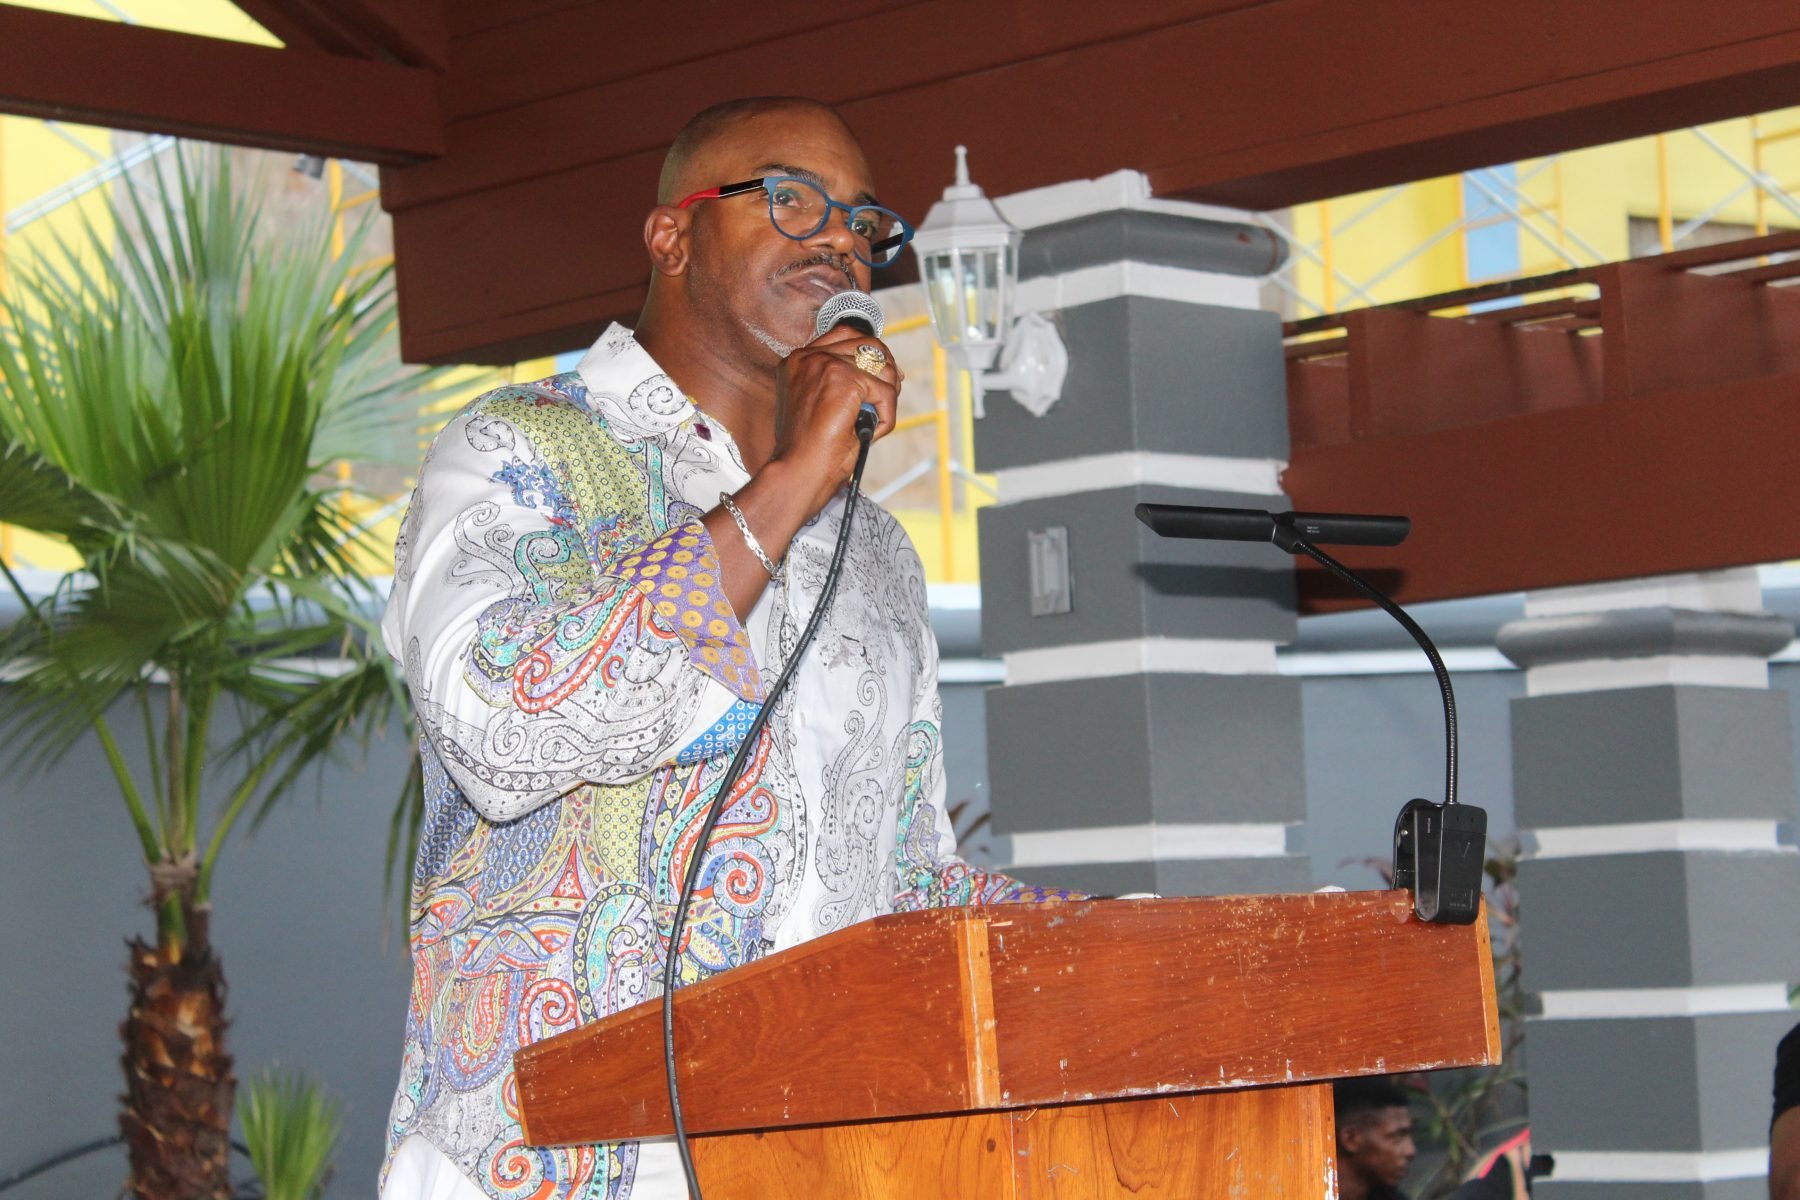 March, service celebrate emancipation. VI urged to remember its past